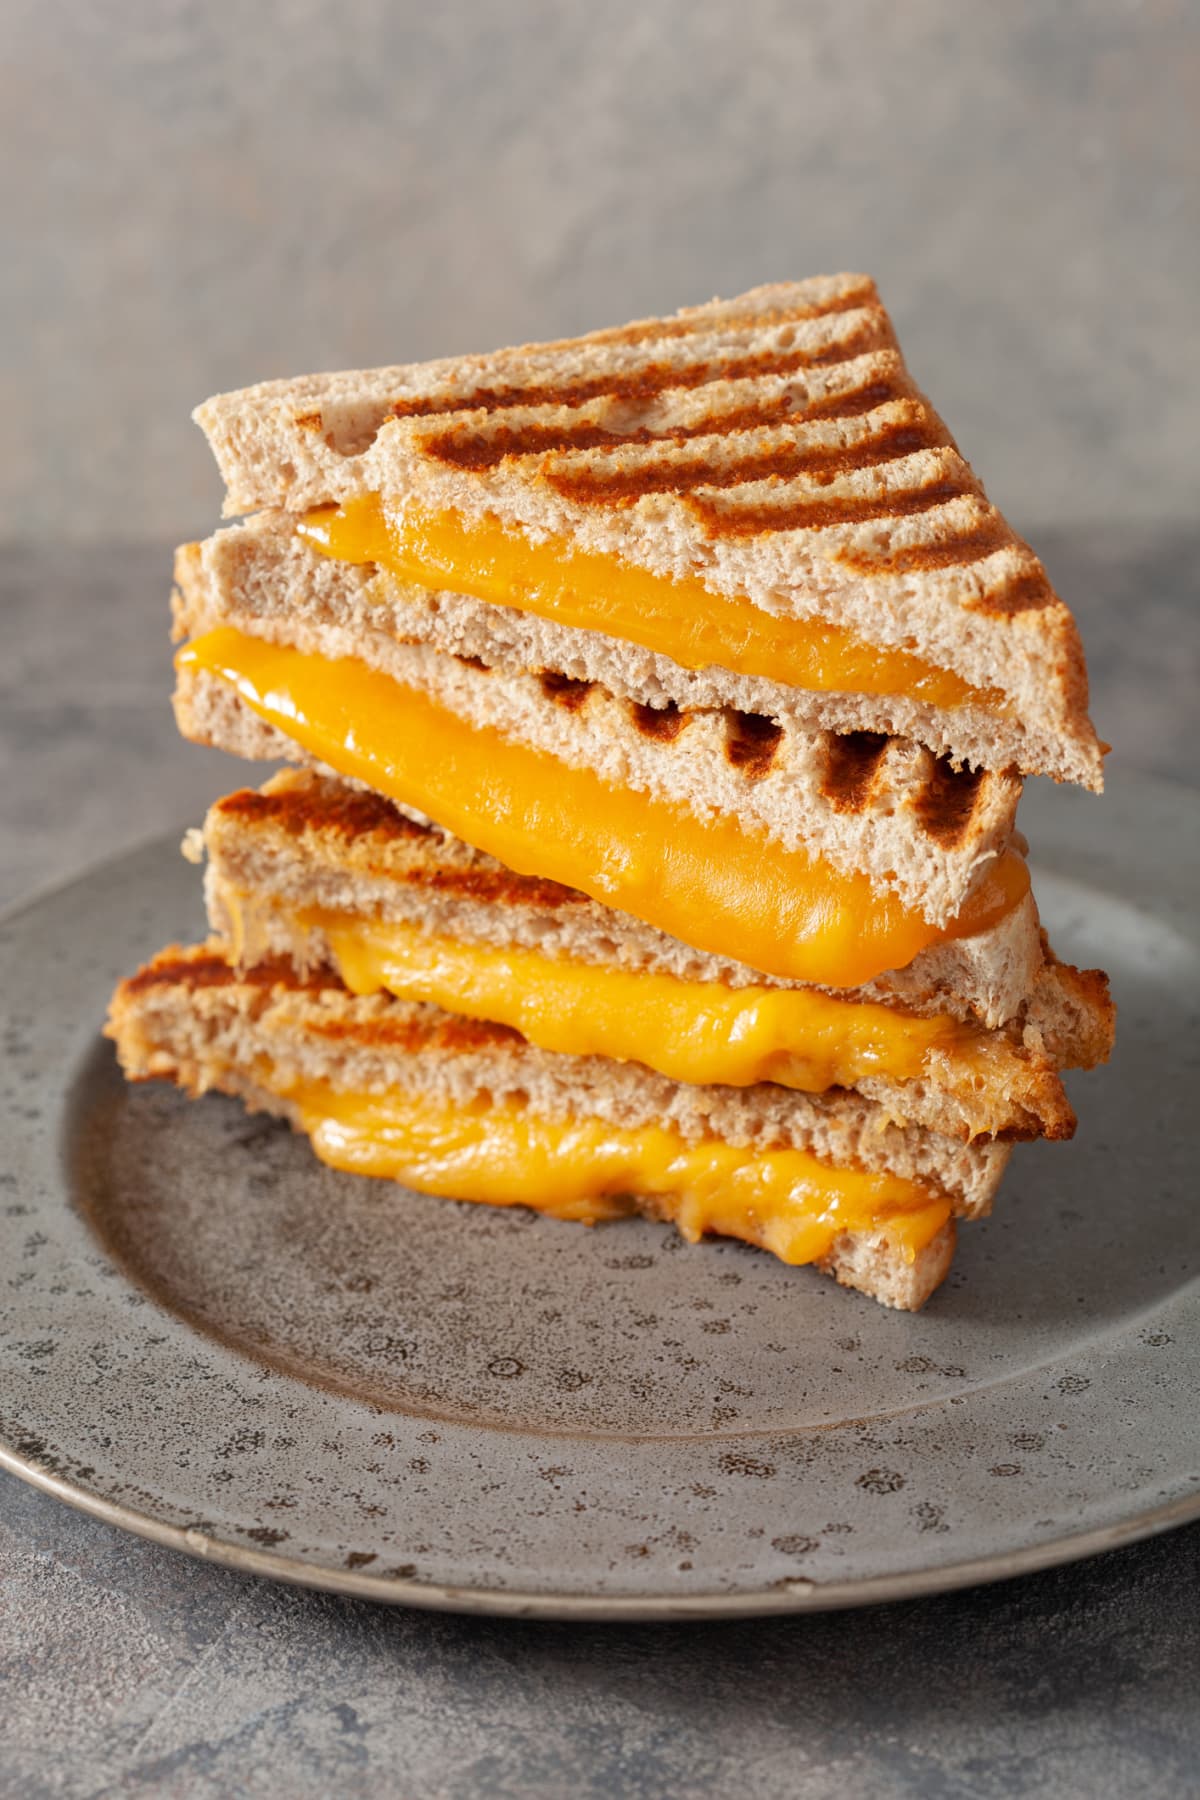 Grilled Cheese Sandwich-Photographed on Hasselblad H3D2-39mb Camera